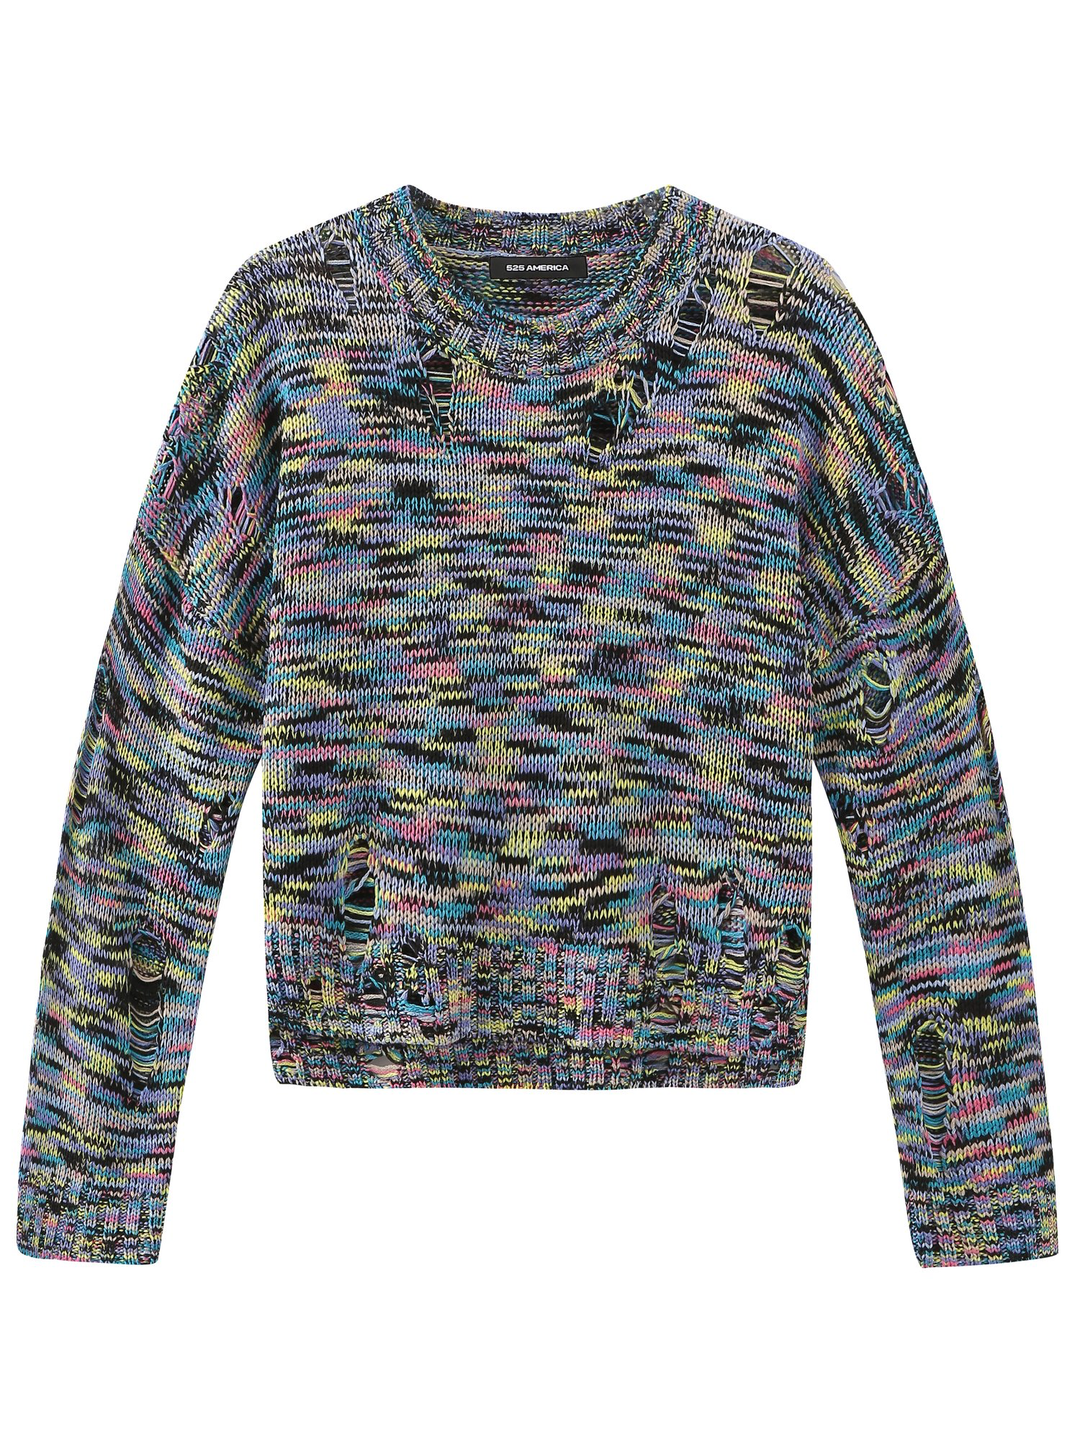 Distressed Pullover - Black Multi - Kingfisher Road - Online Boutique